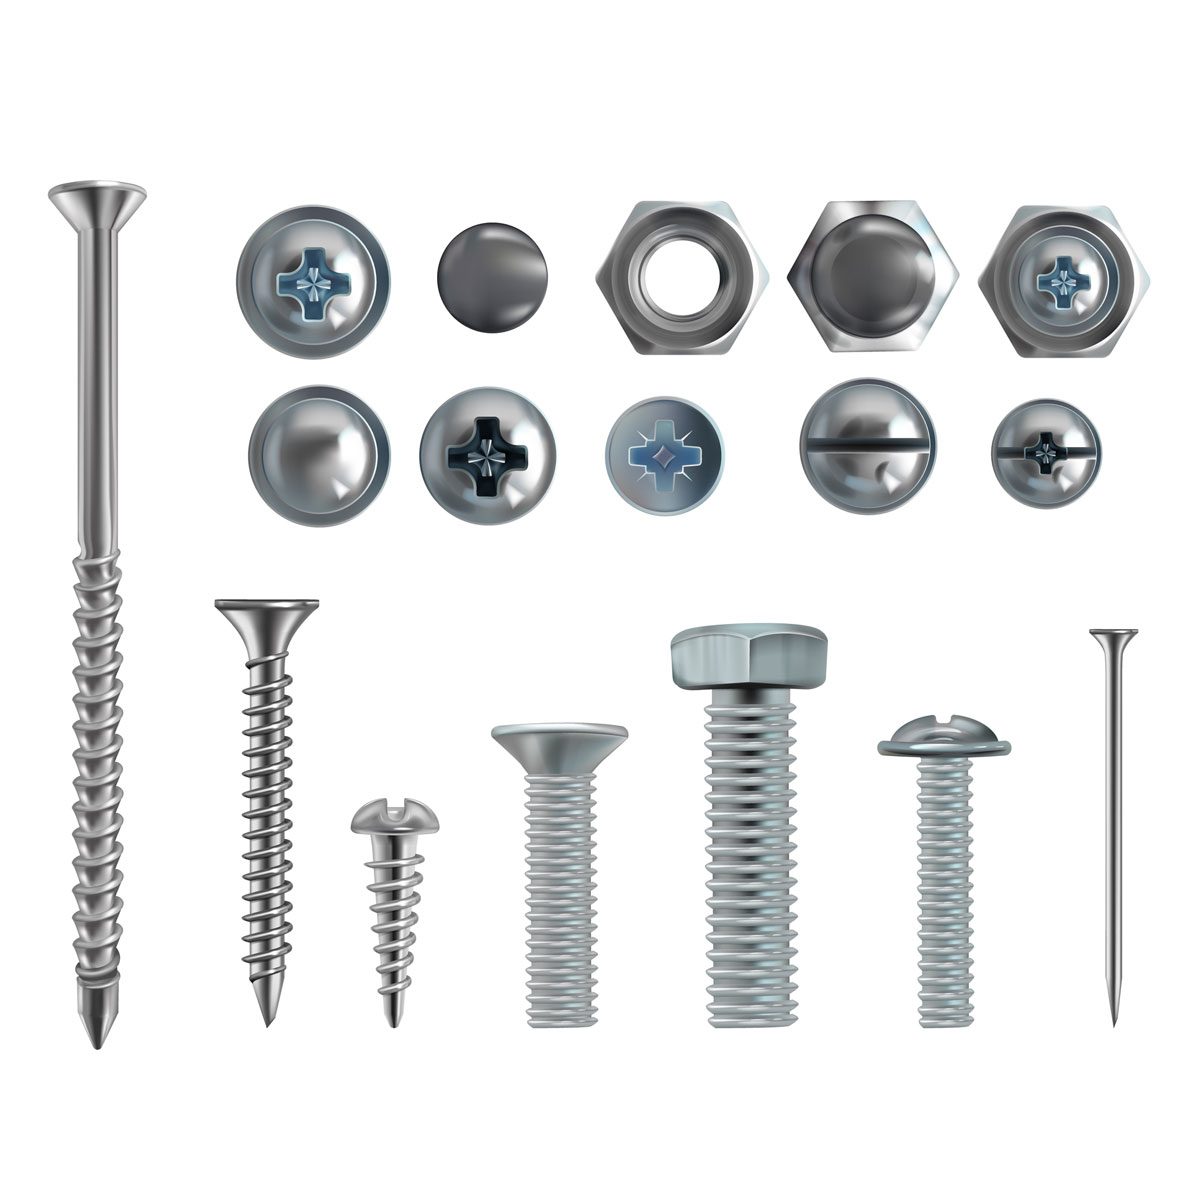 Types of Fasteners and How to Choose Them for Your Project